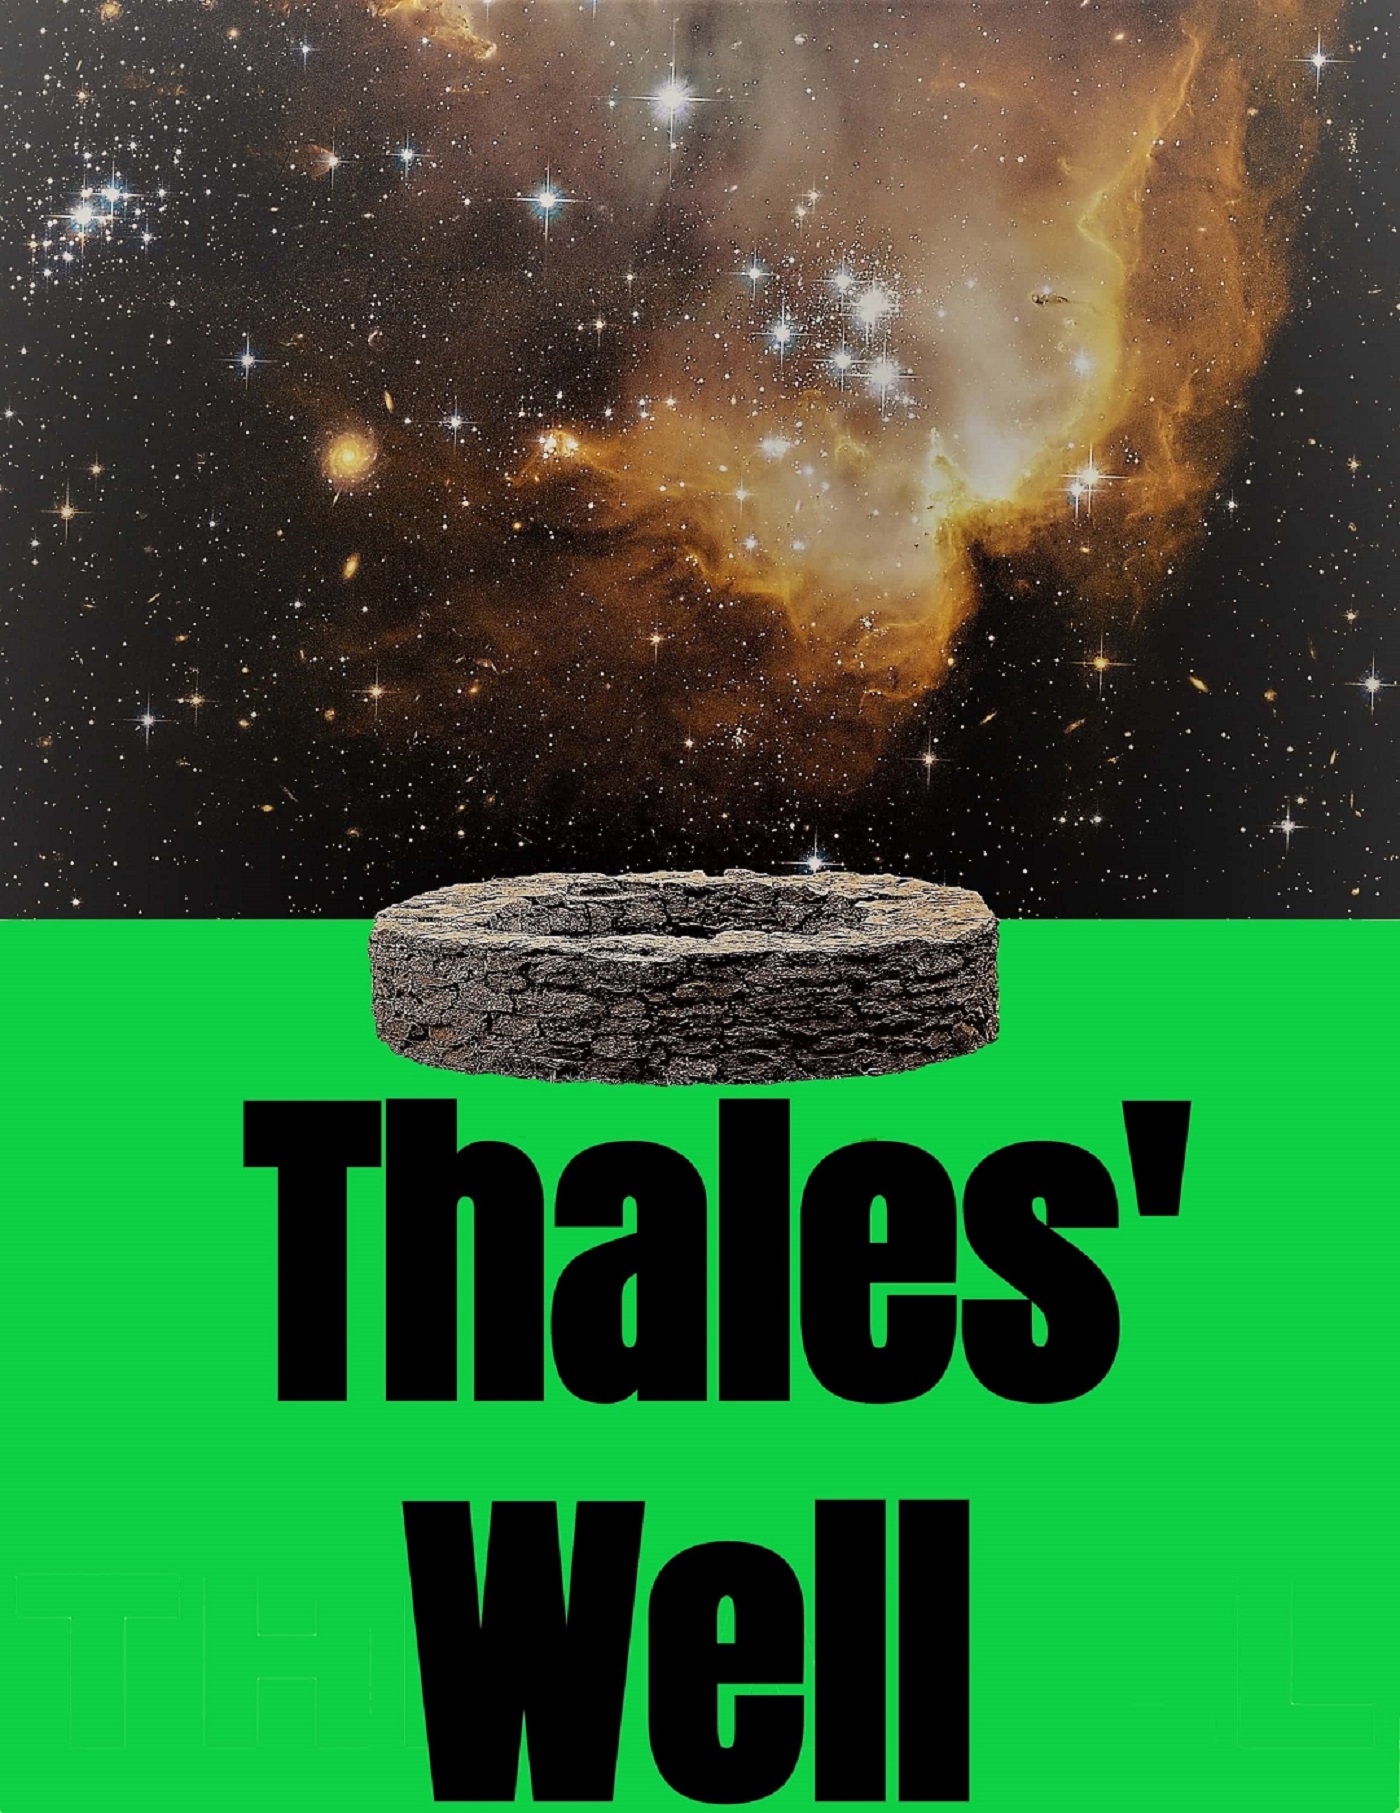 Thales’ Well